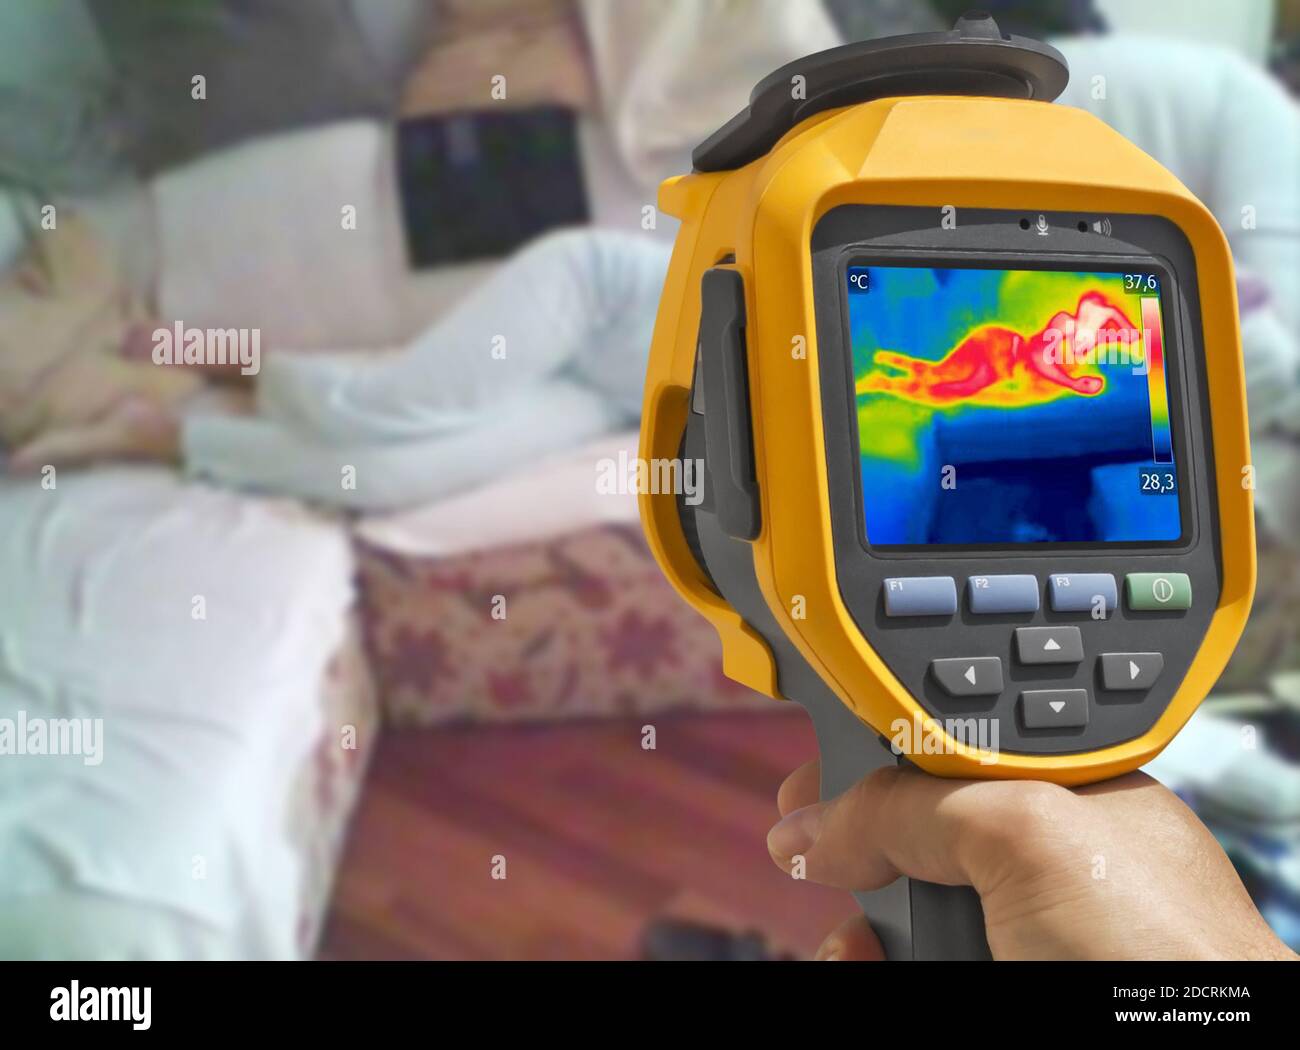 Recording with thermal camera Young woman is lying on the bed Stock Photo